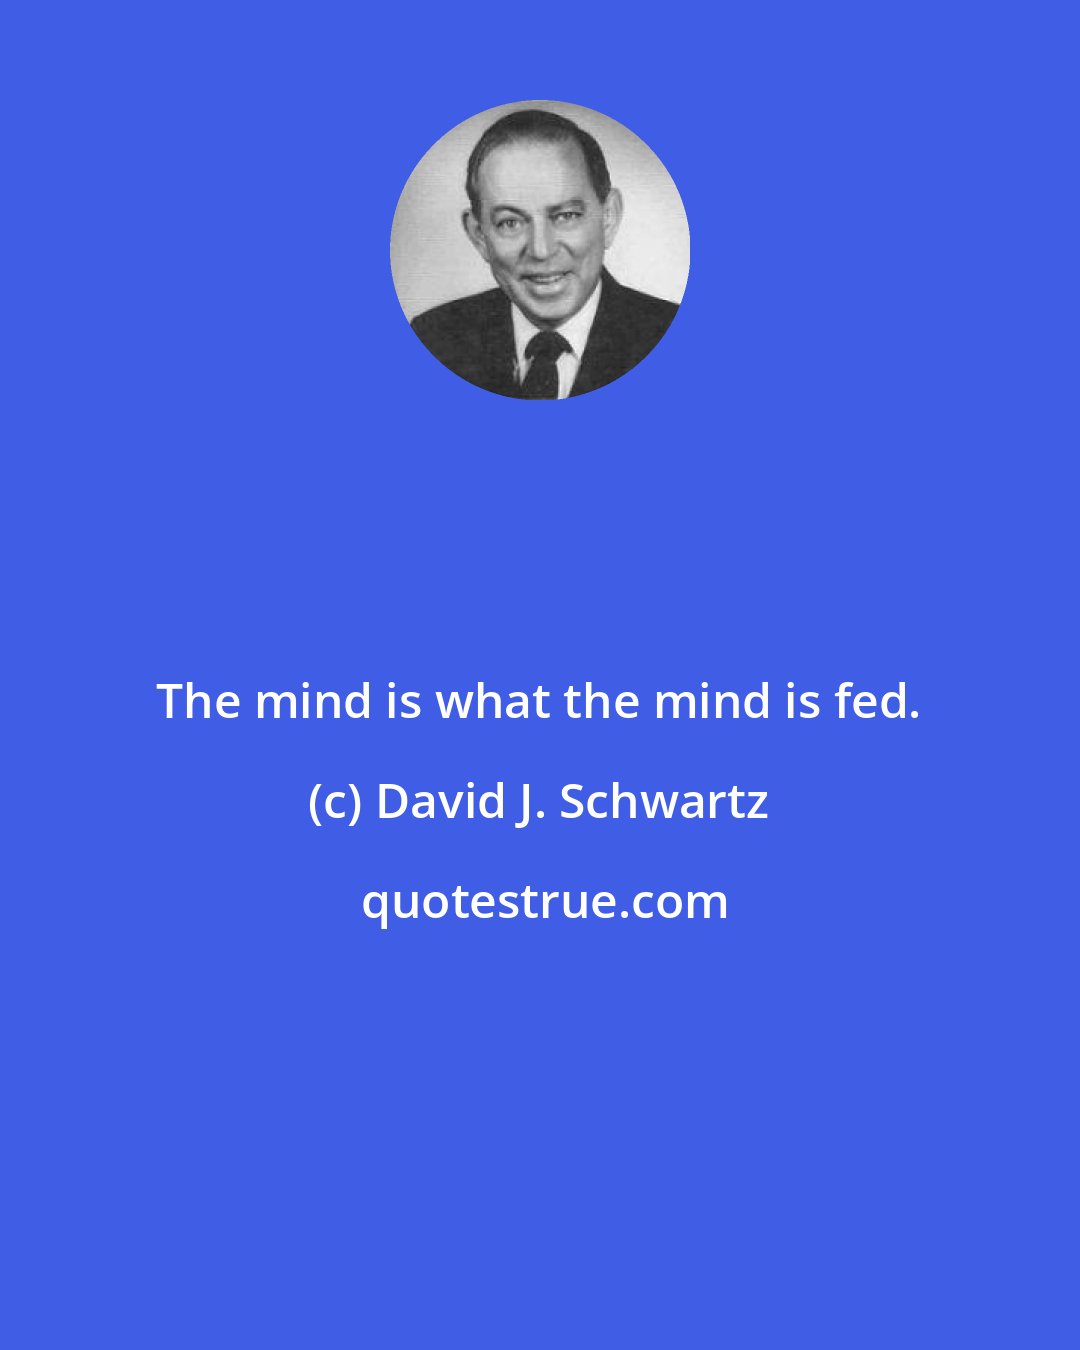 David J. Schwartz: The mind is what the mind is fed.